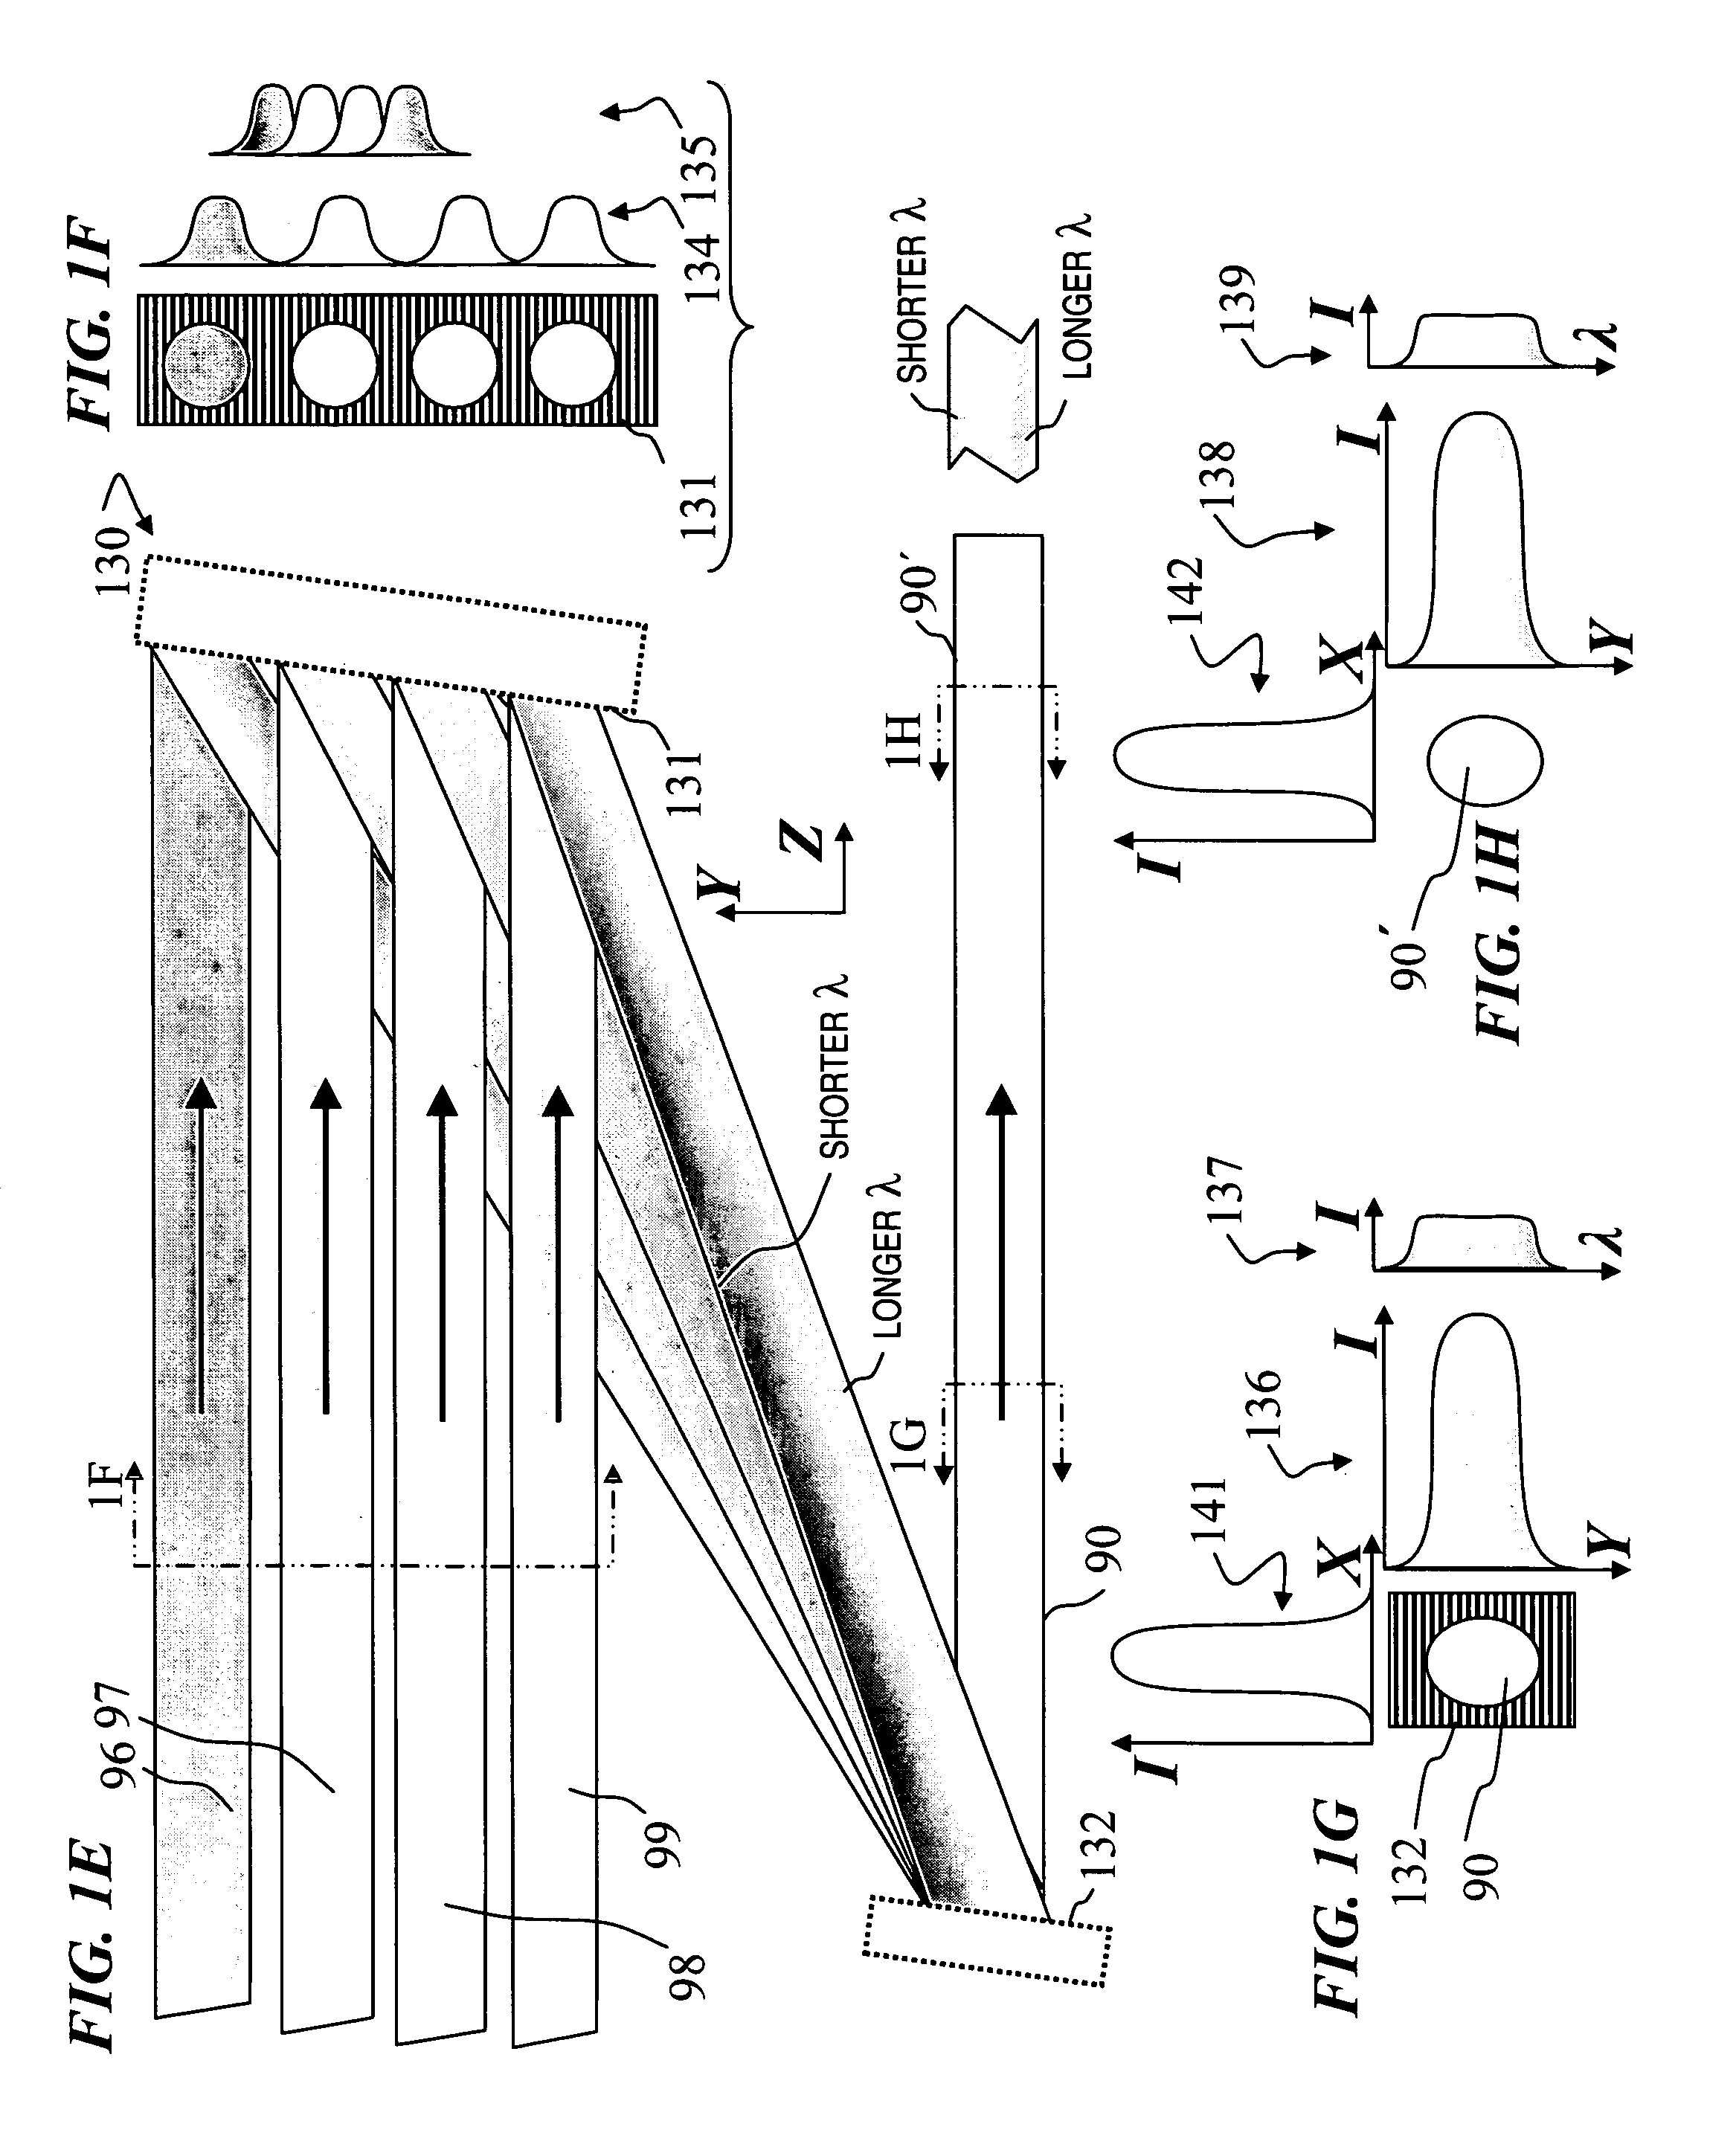 Apparatus and method for spectral-beam combining of high-power fiber lasers